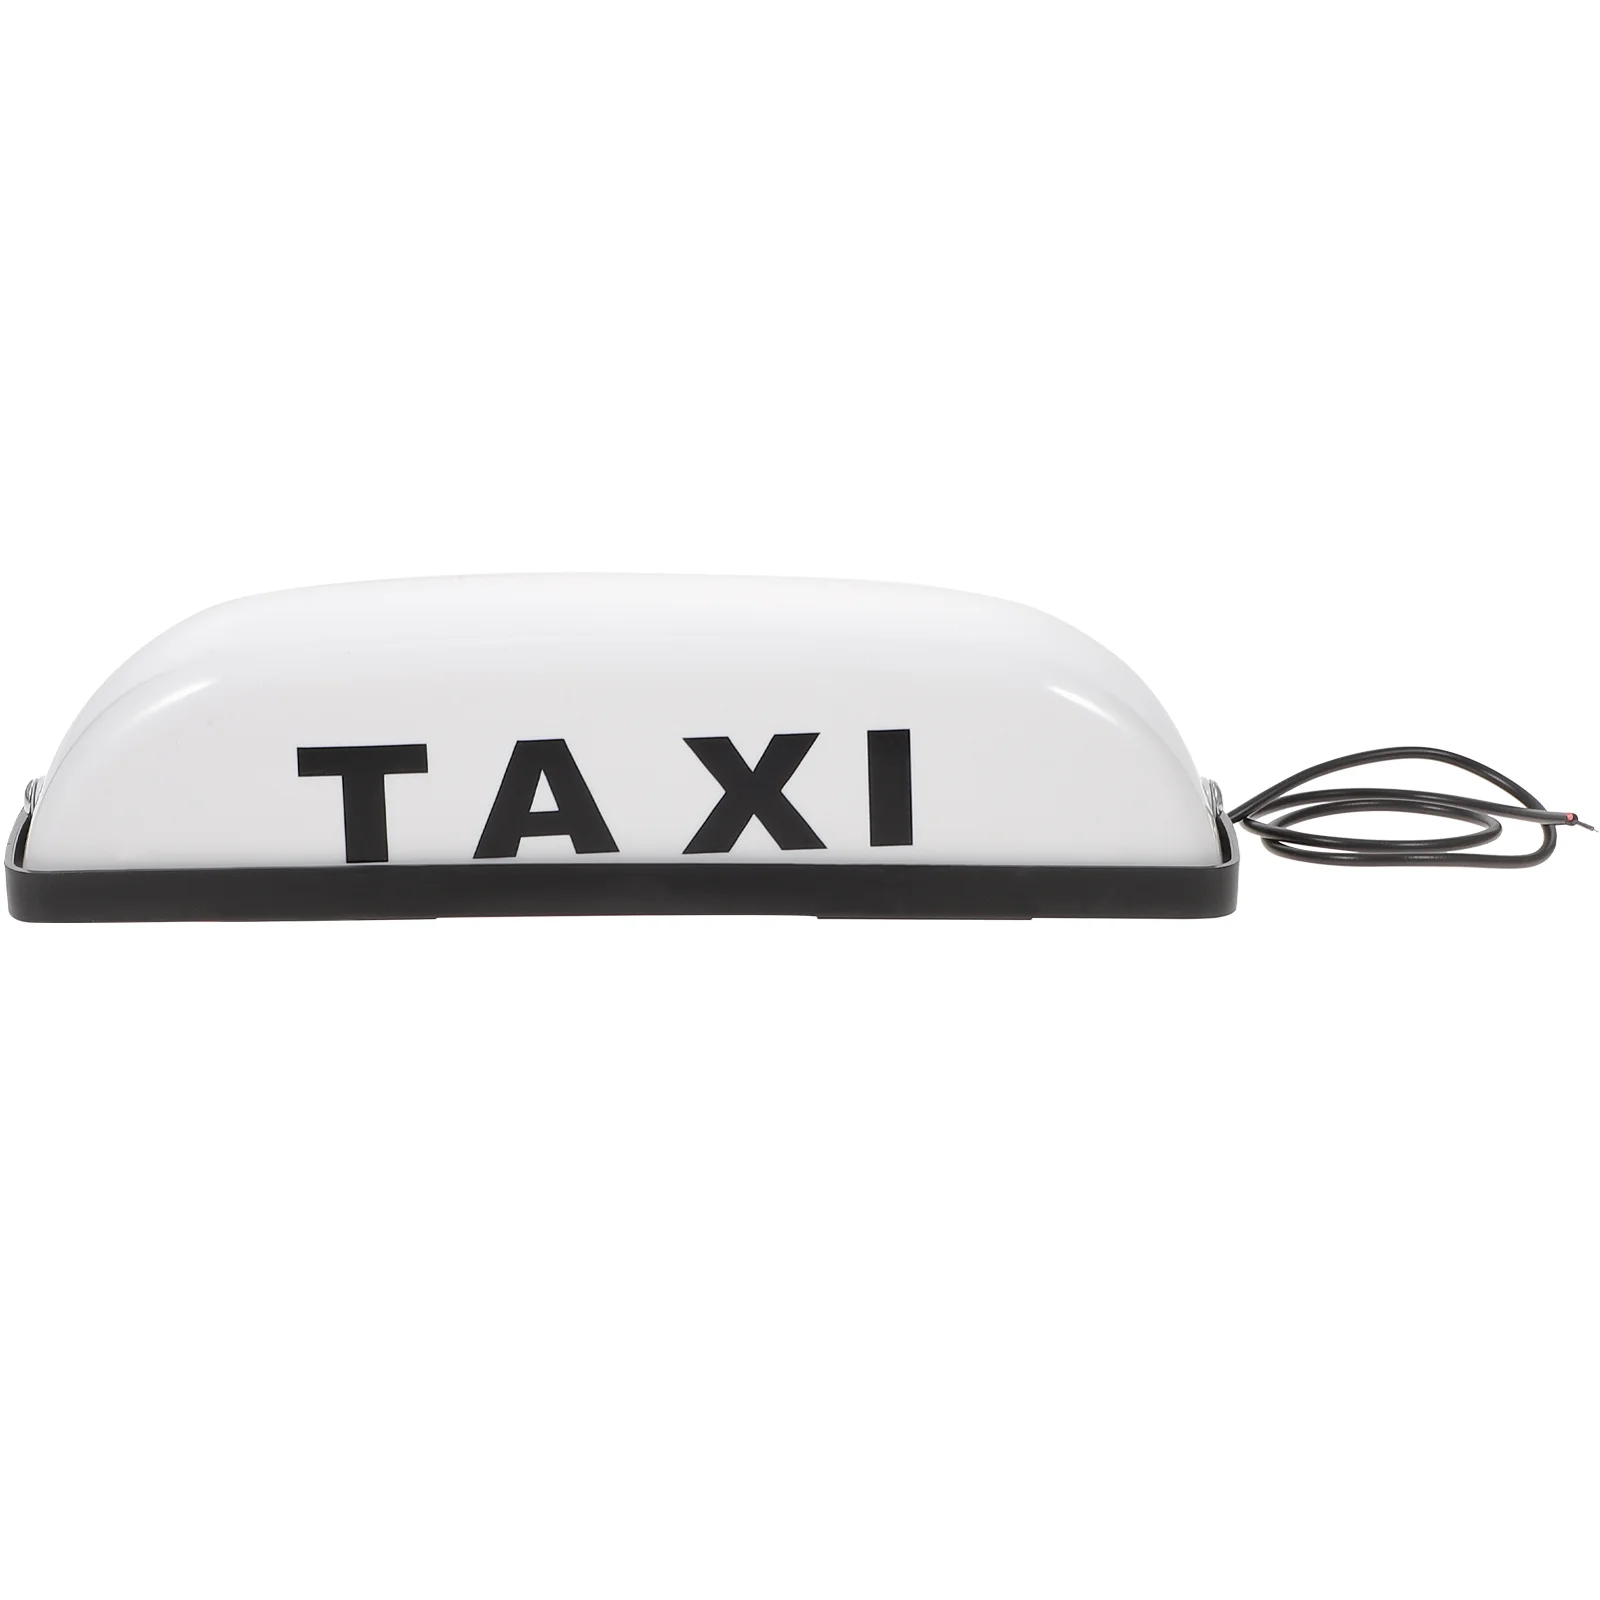 

Taxi Dome Light LED Sign Top Cab Roof Illuminated Topper Car Flag Magnetic Signs Large